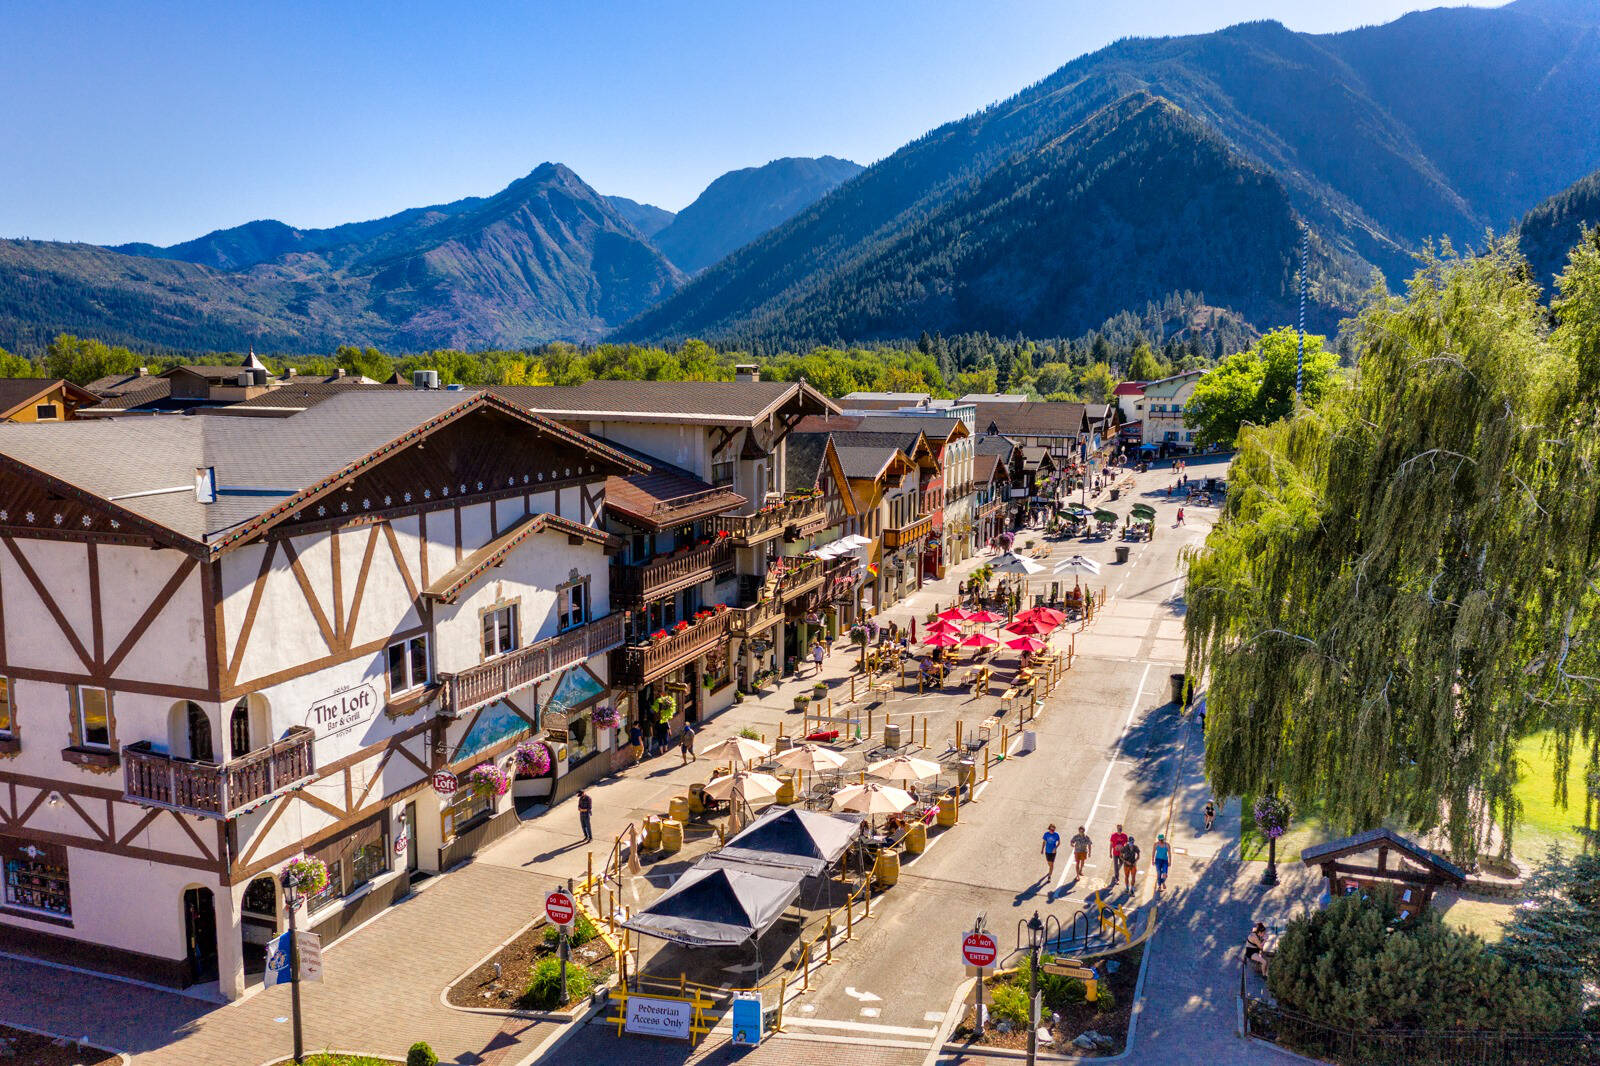 Nestled in the heart of the Cascades between Seattle and Spokane, Washington’s Bavarian village is just over two hours’ drive from Seattle along the I-90 or US Highway 2.